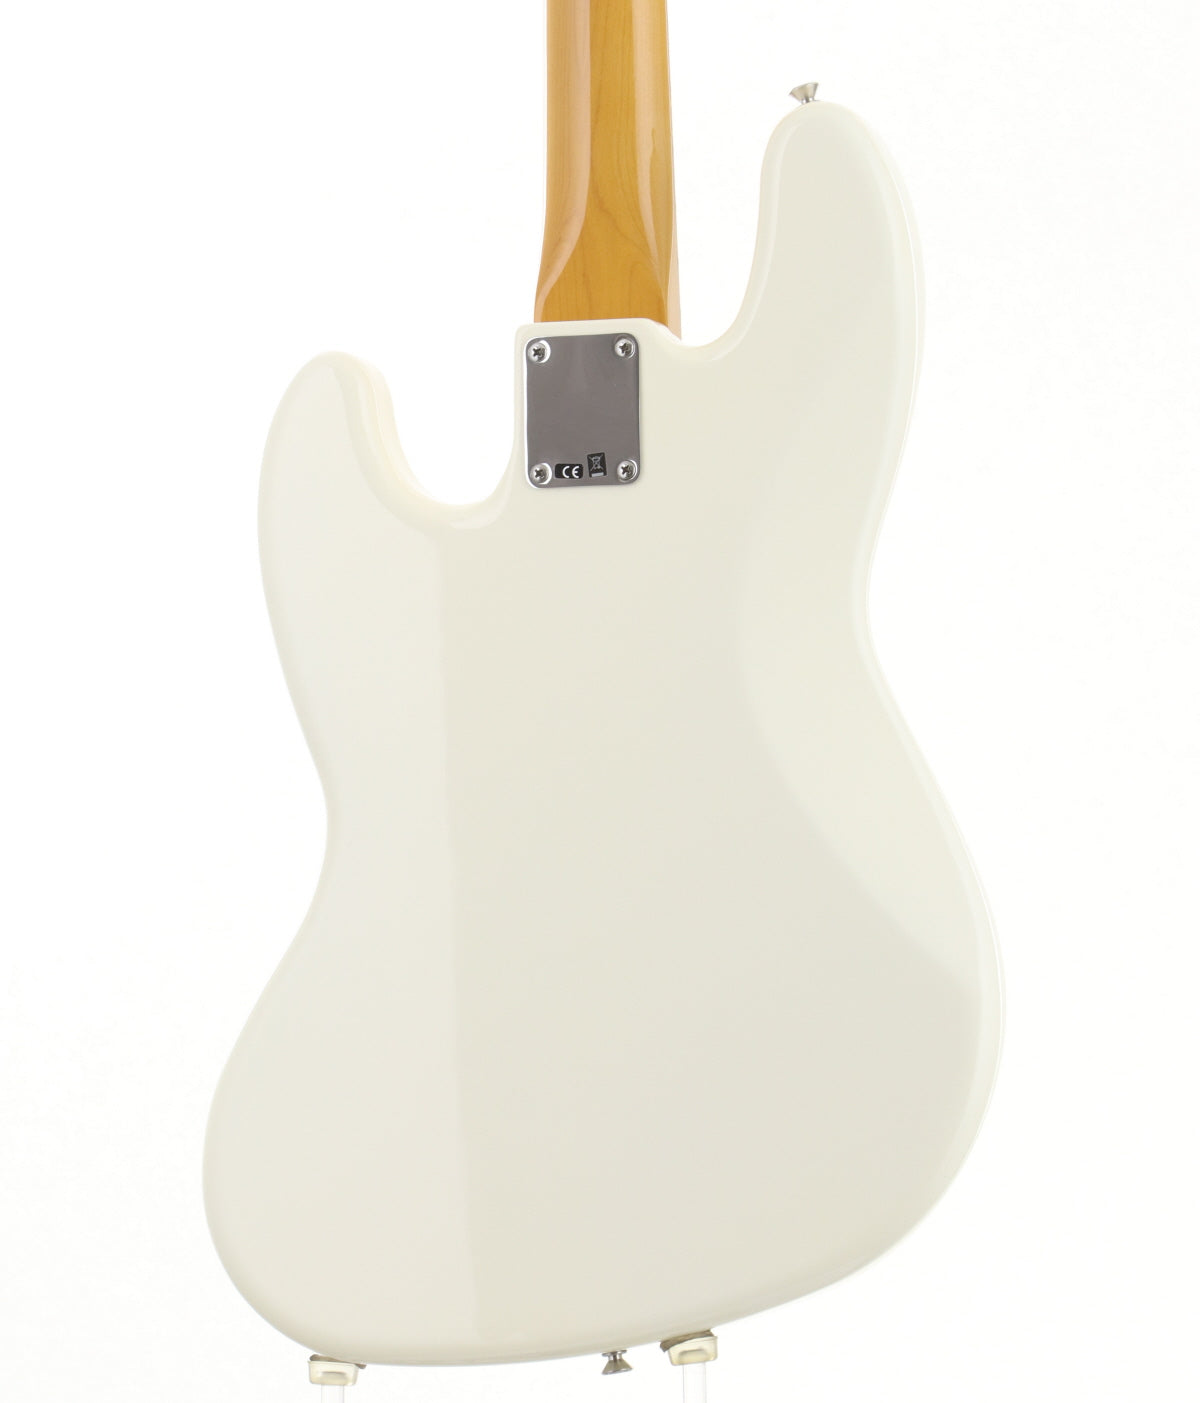 [SN MX18110411] USED FENDER MEXICO / Classic Series 60s Jazz Bass Lacquer Olympic White Pau Ferro [08]